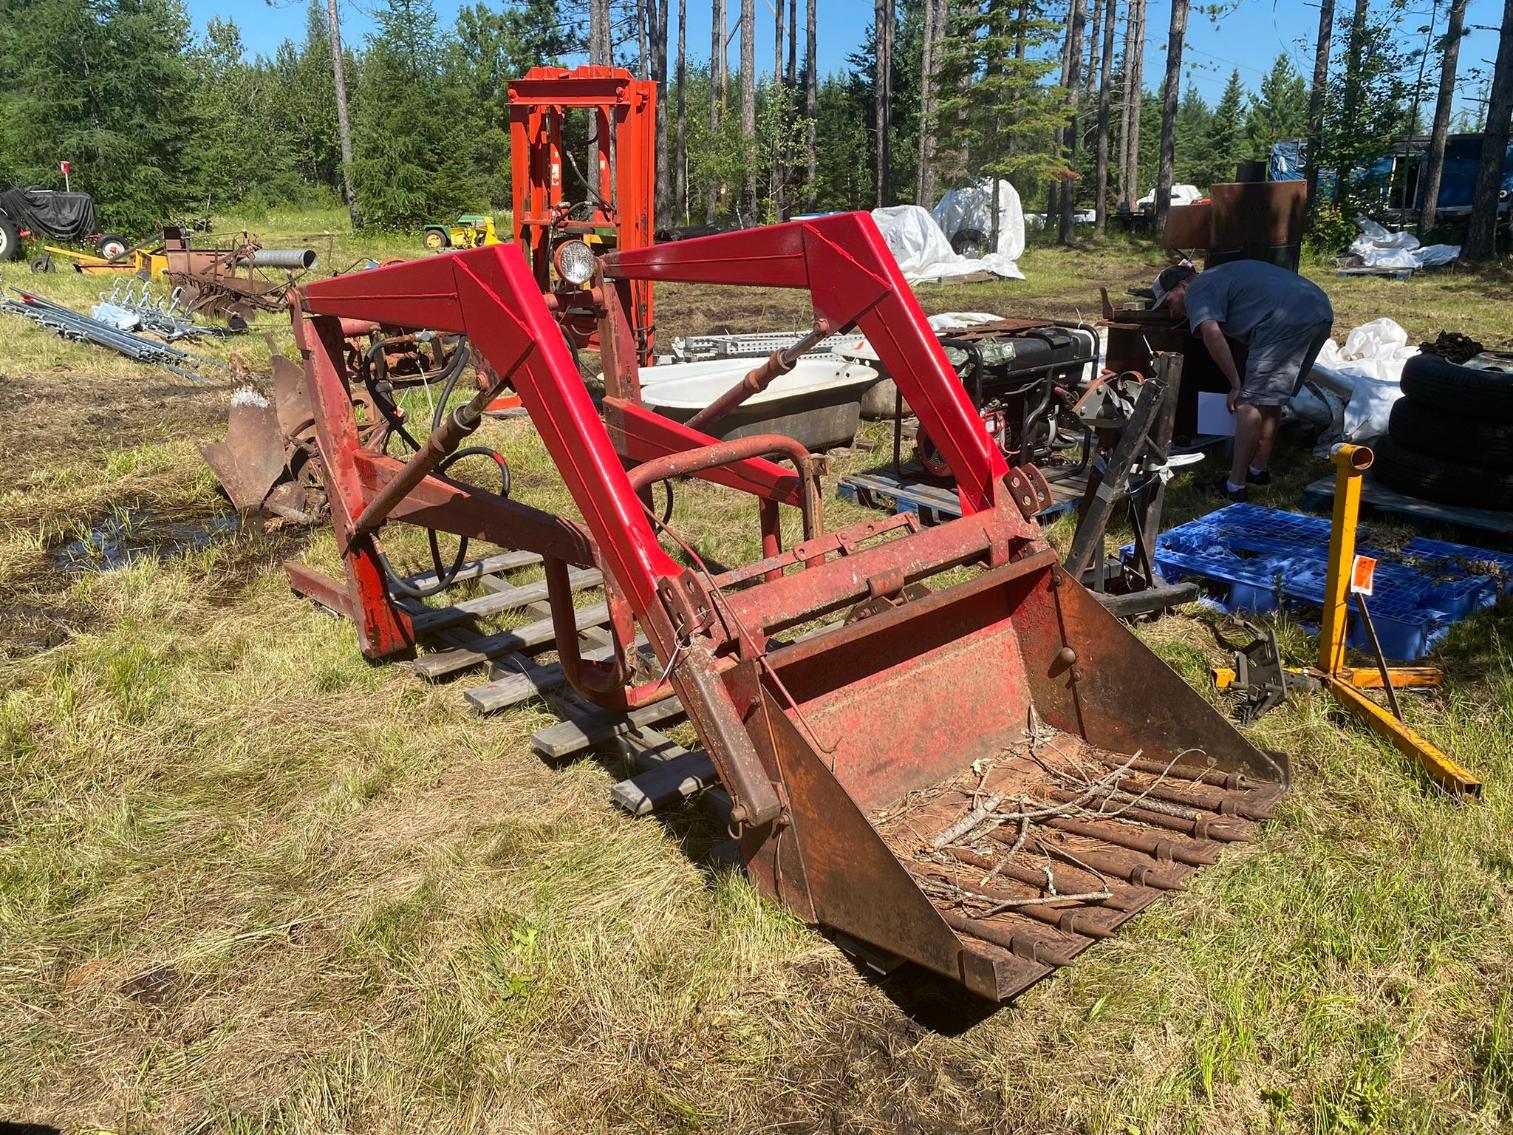 Iron Area Moving Auction: Cars, Campers, Tractor, Implements